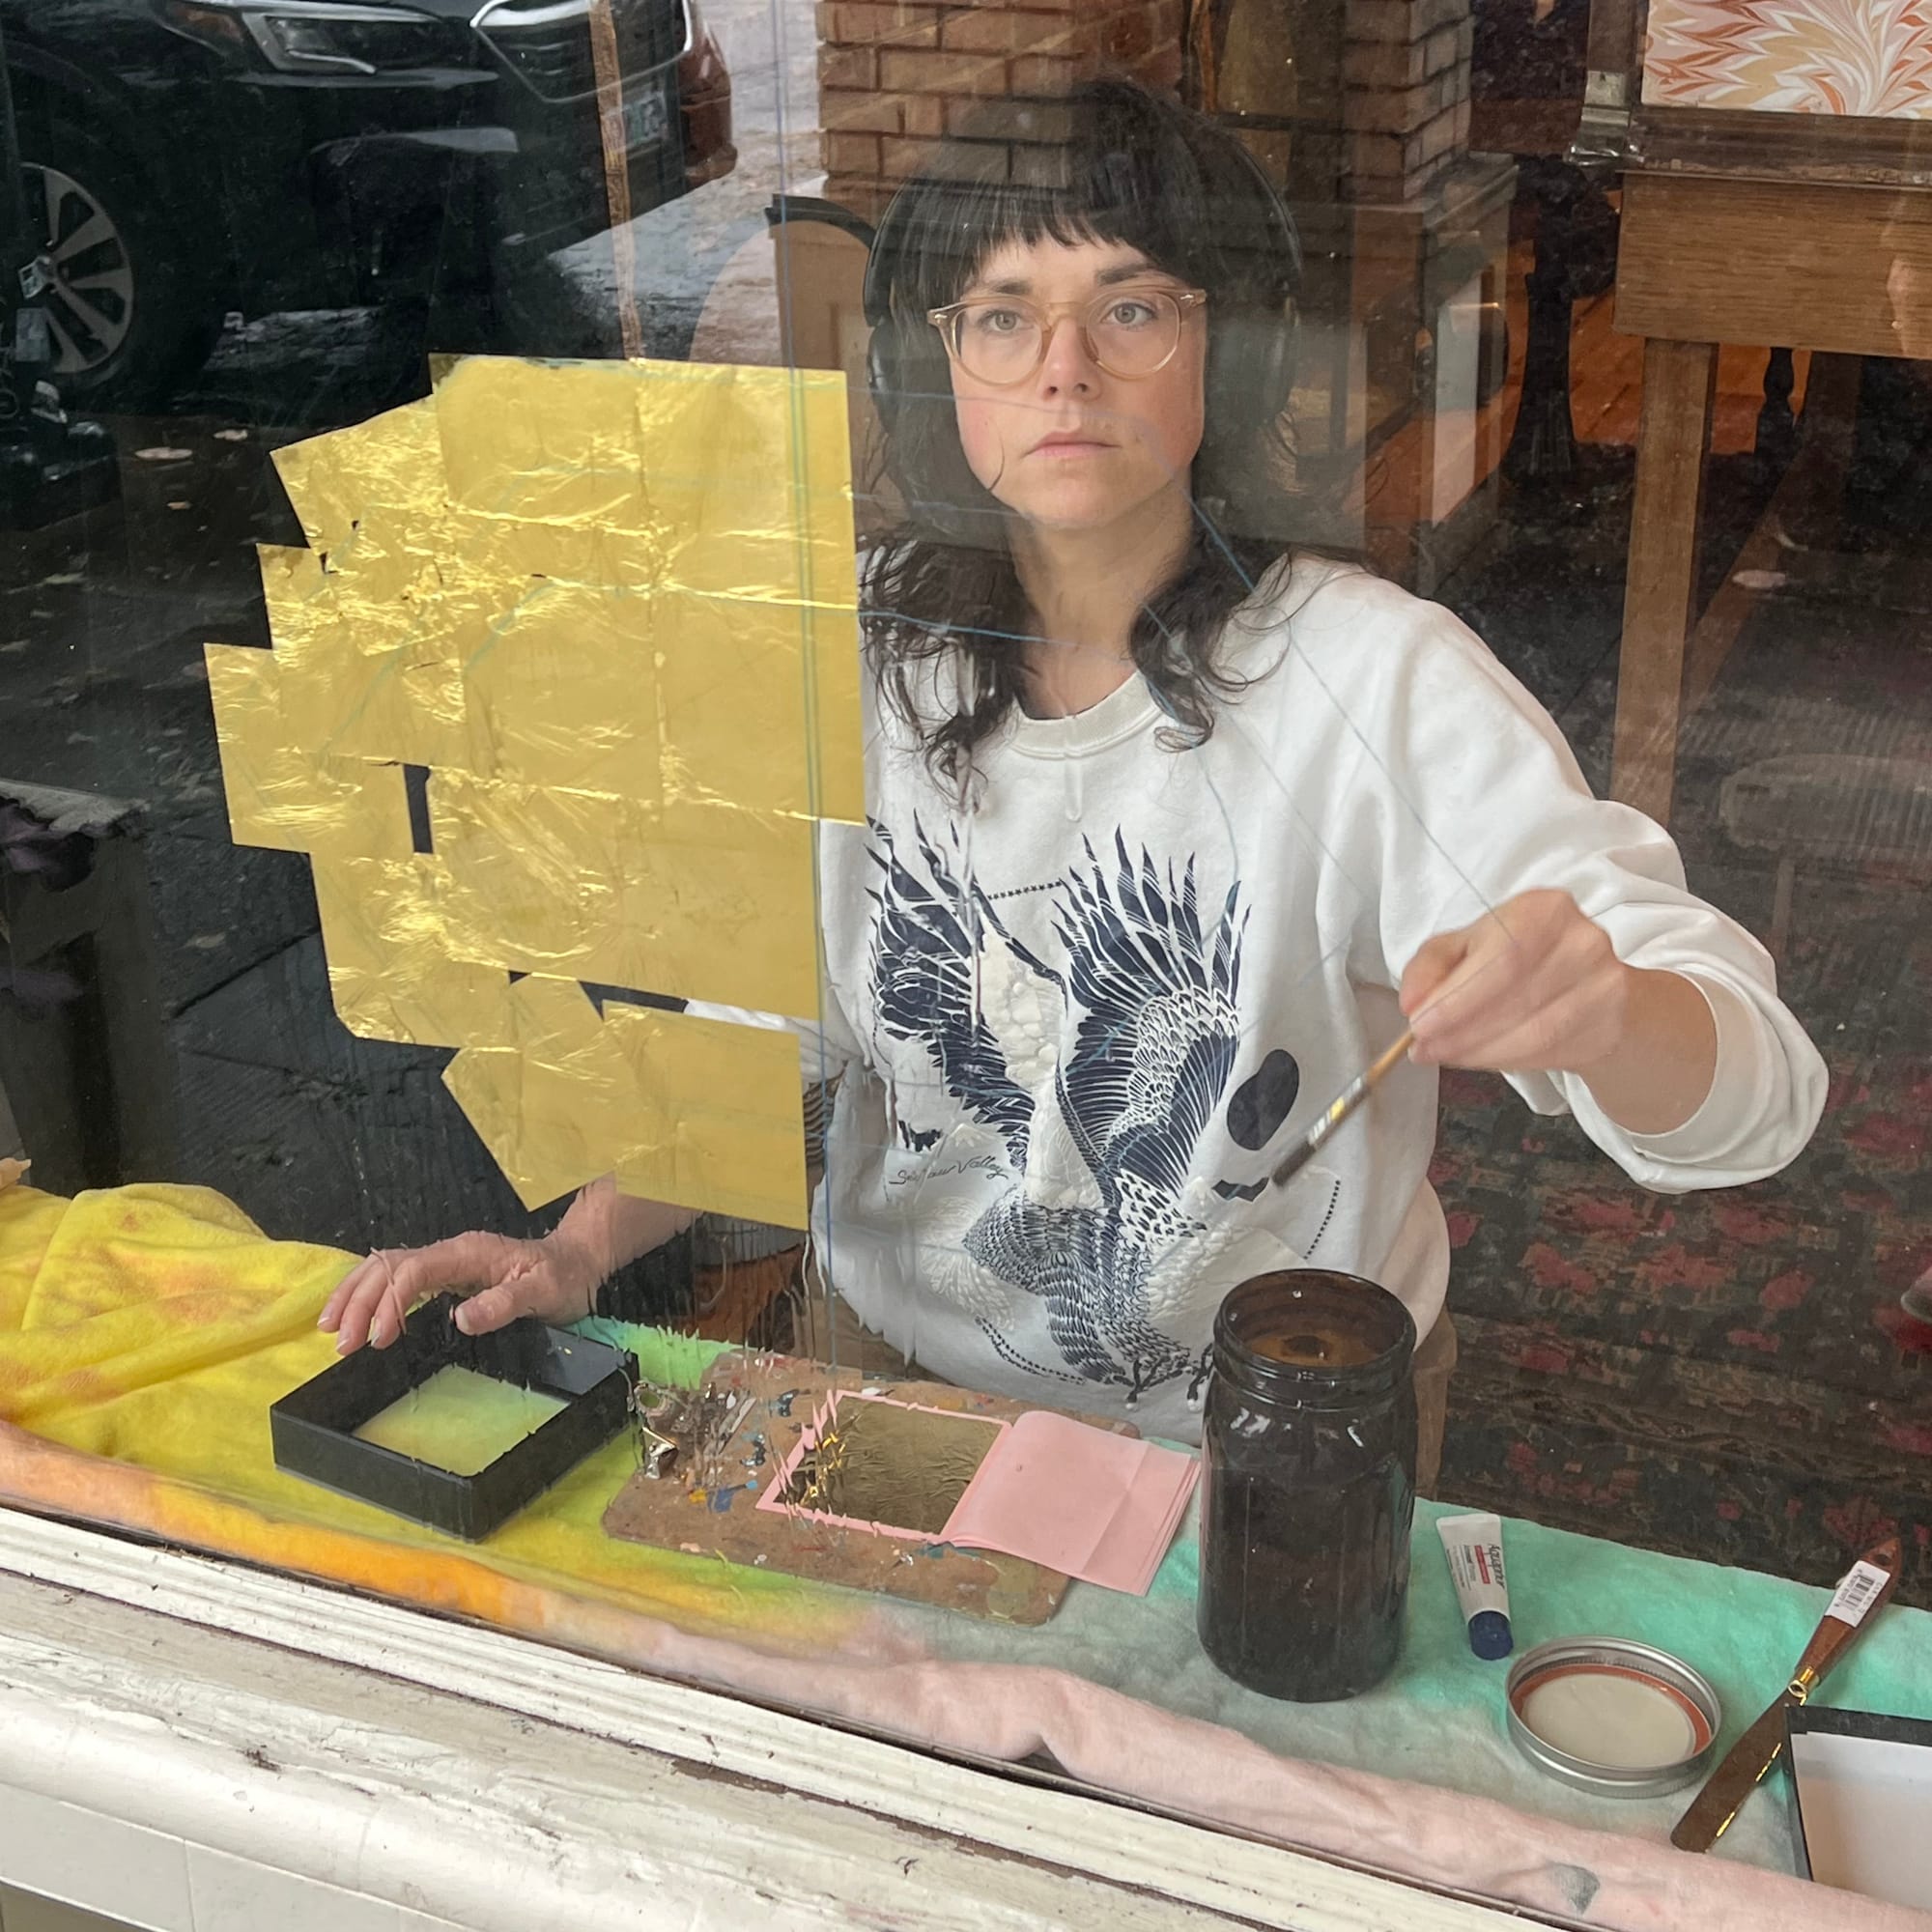 View through a window of a woman wearing headphones and in the process of places squares of gold on the glass.